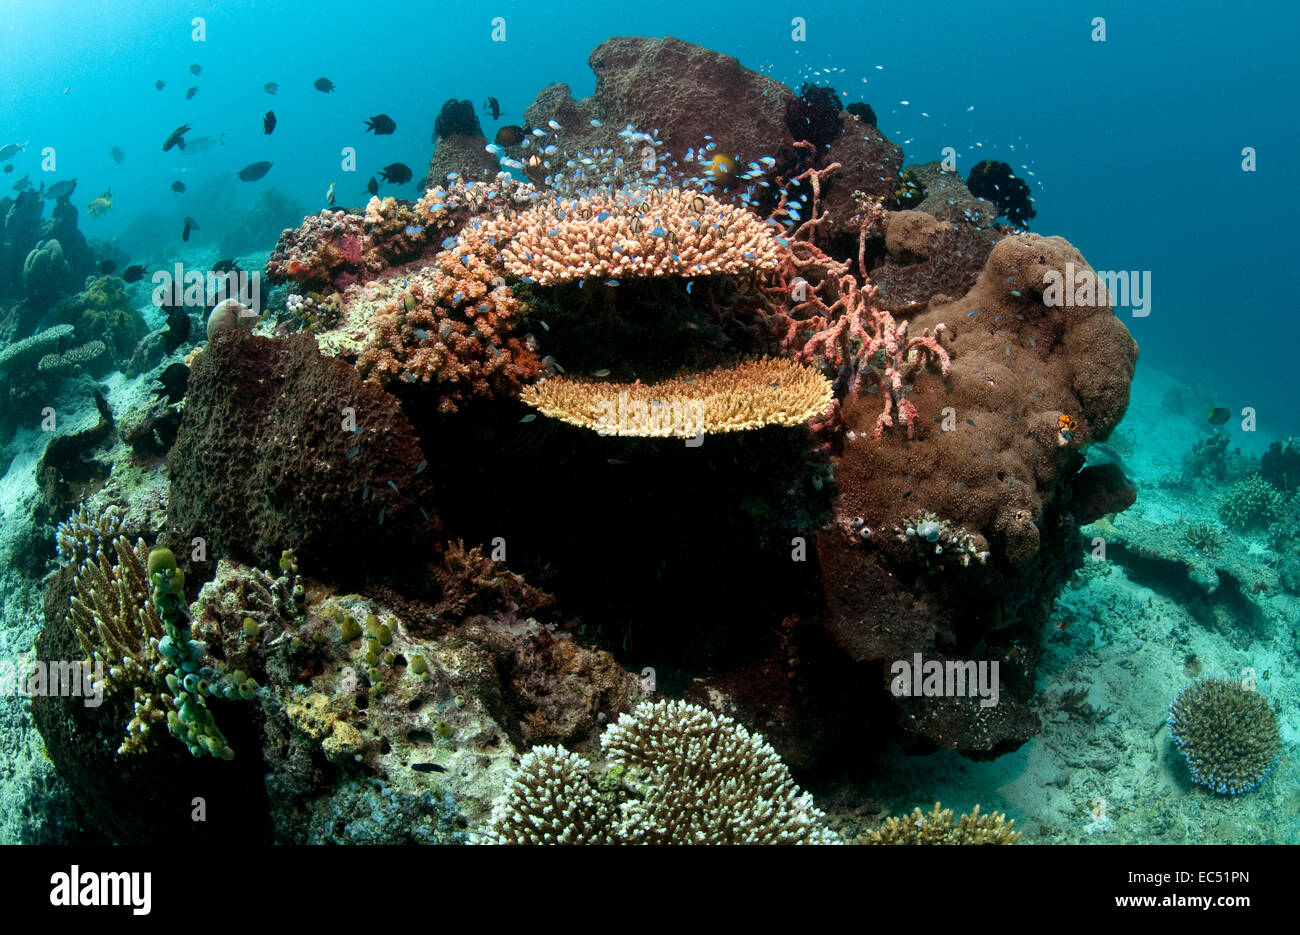 Live in the coral reef Stock Photo